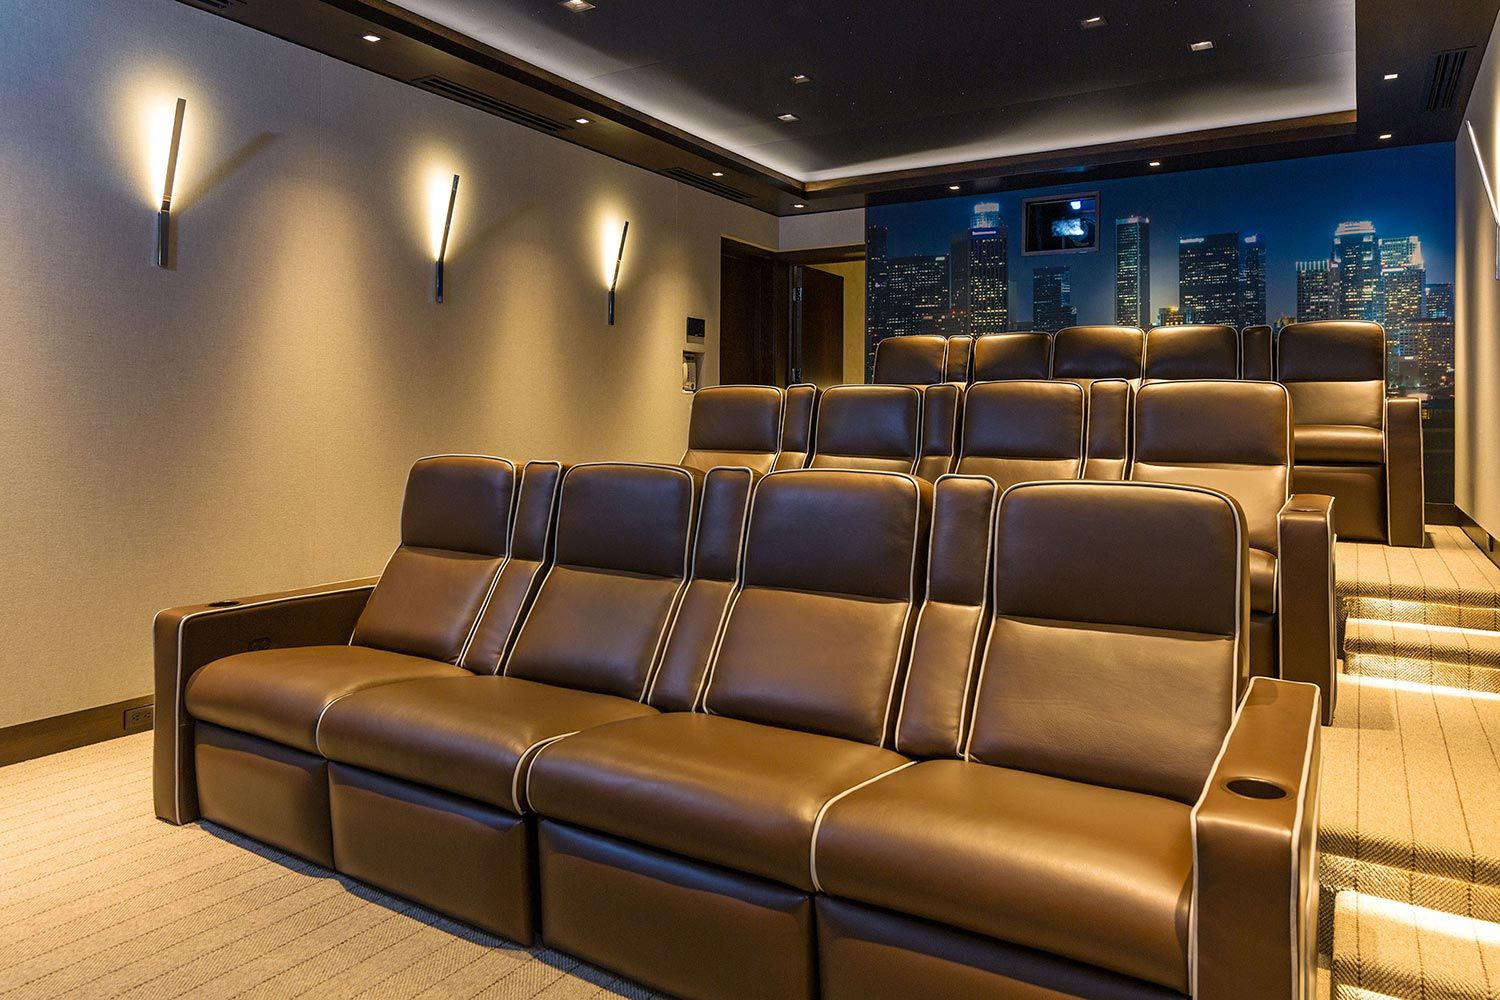 Home Theater Seating in brown